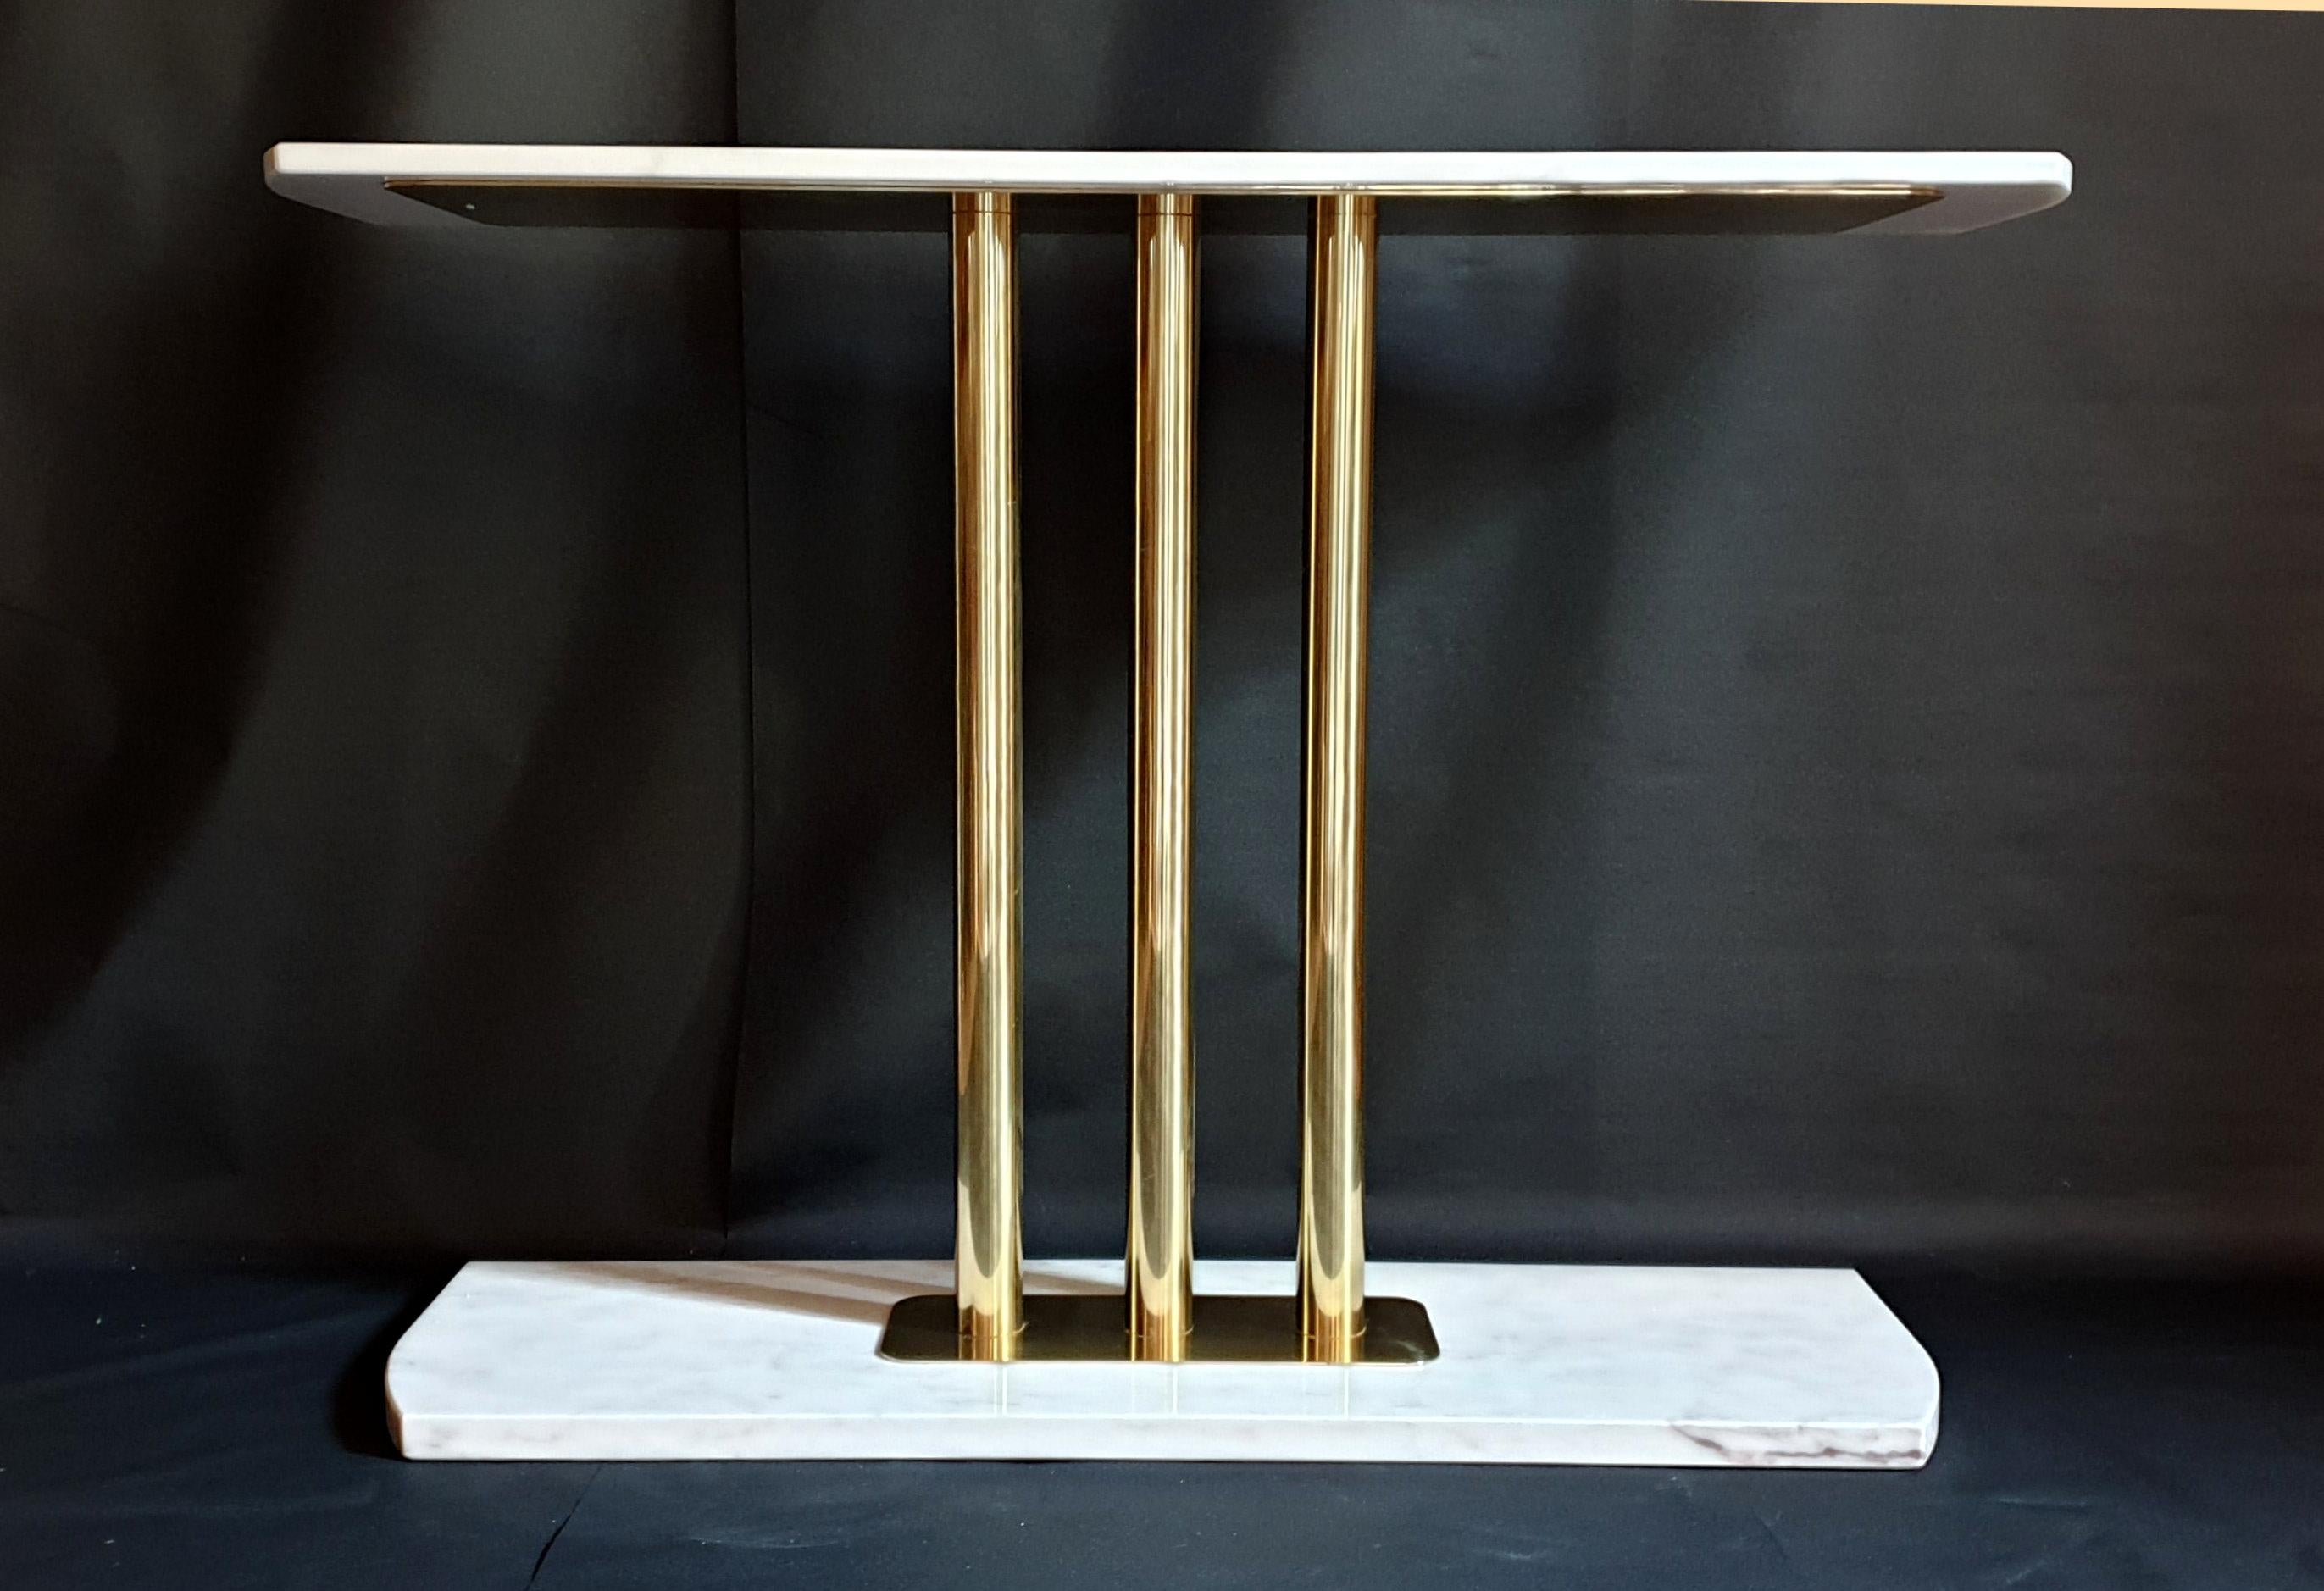 White and Gray Carrara Marble and Brass Mid-Century Modern Console Table, Italy 1